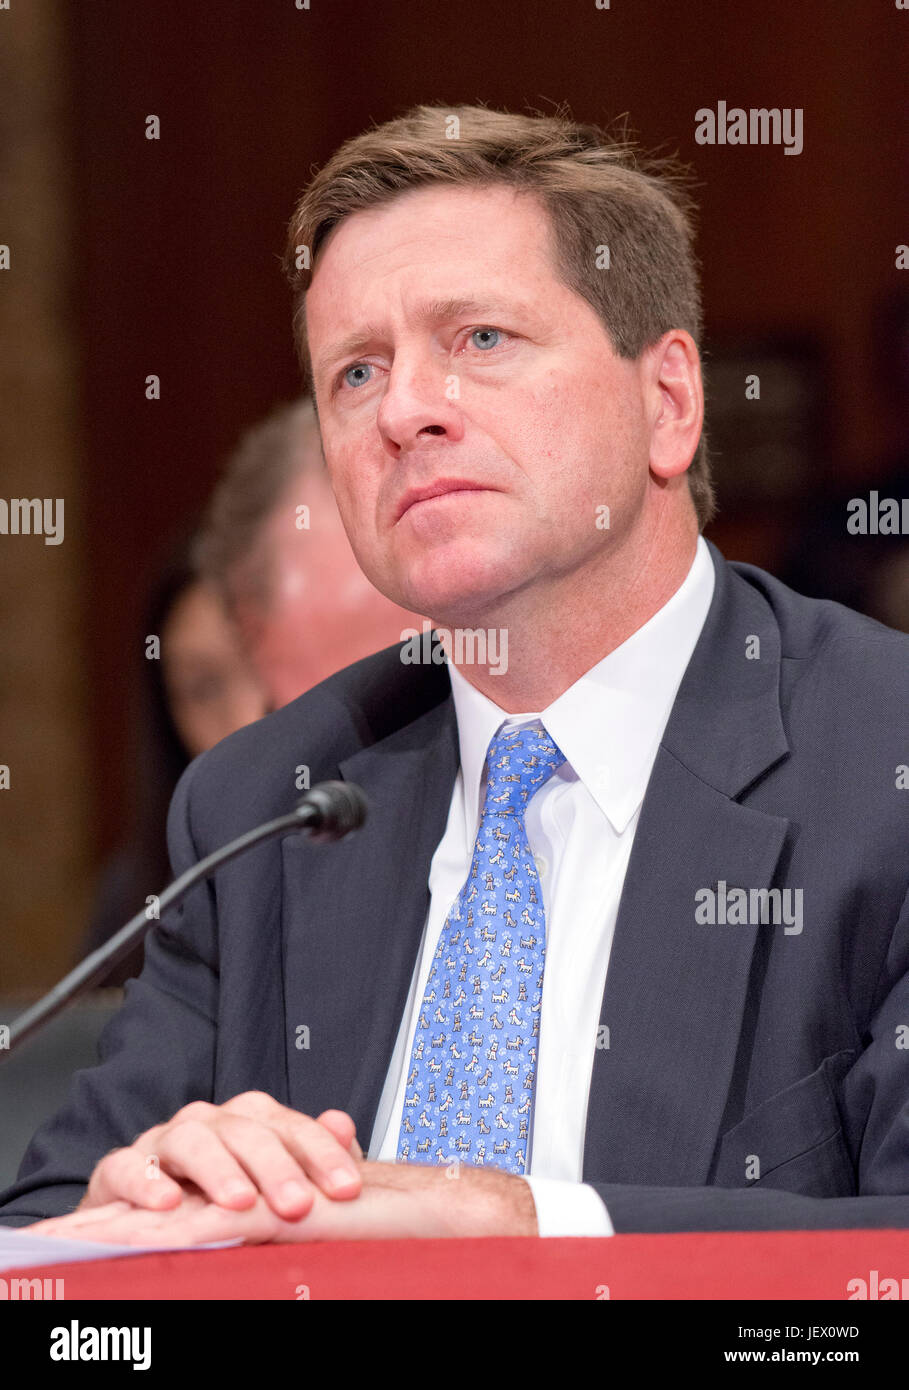 Jay Clayton, Chairman, United States Securities and Exchange Commission testifies before the US Senate Committee on Appropriations Subcommittee on Financial Services and General Government hearing to examine proposed budget estimates and justification for fiscal year 2018 for the SEC and the CFTC on Capitol Hill in Washington, DC on Tuesday, June 27, 2017. Credit: Ron Sachs/CNP /MediaPunch Stock Photo